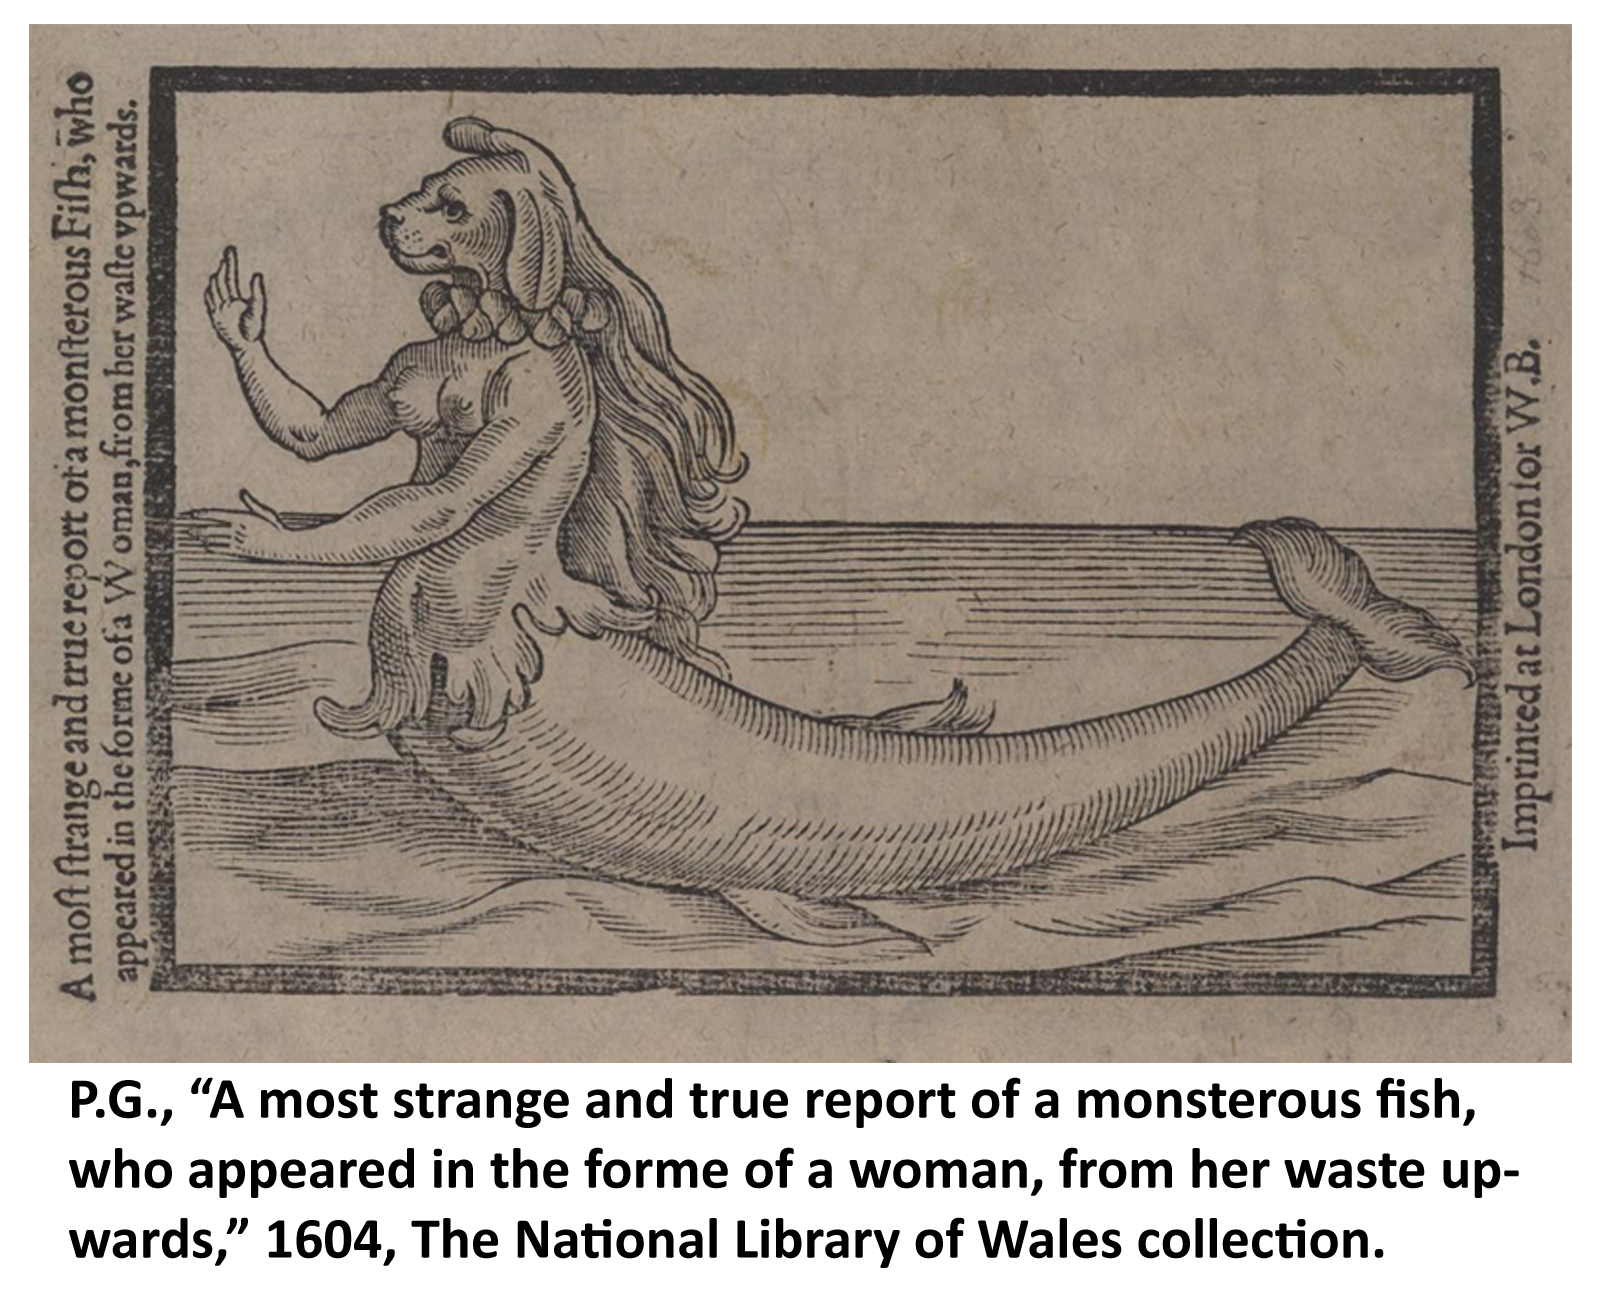 Pamphlet print of a mermaid from 1604